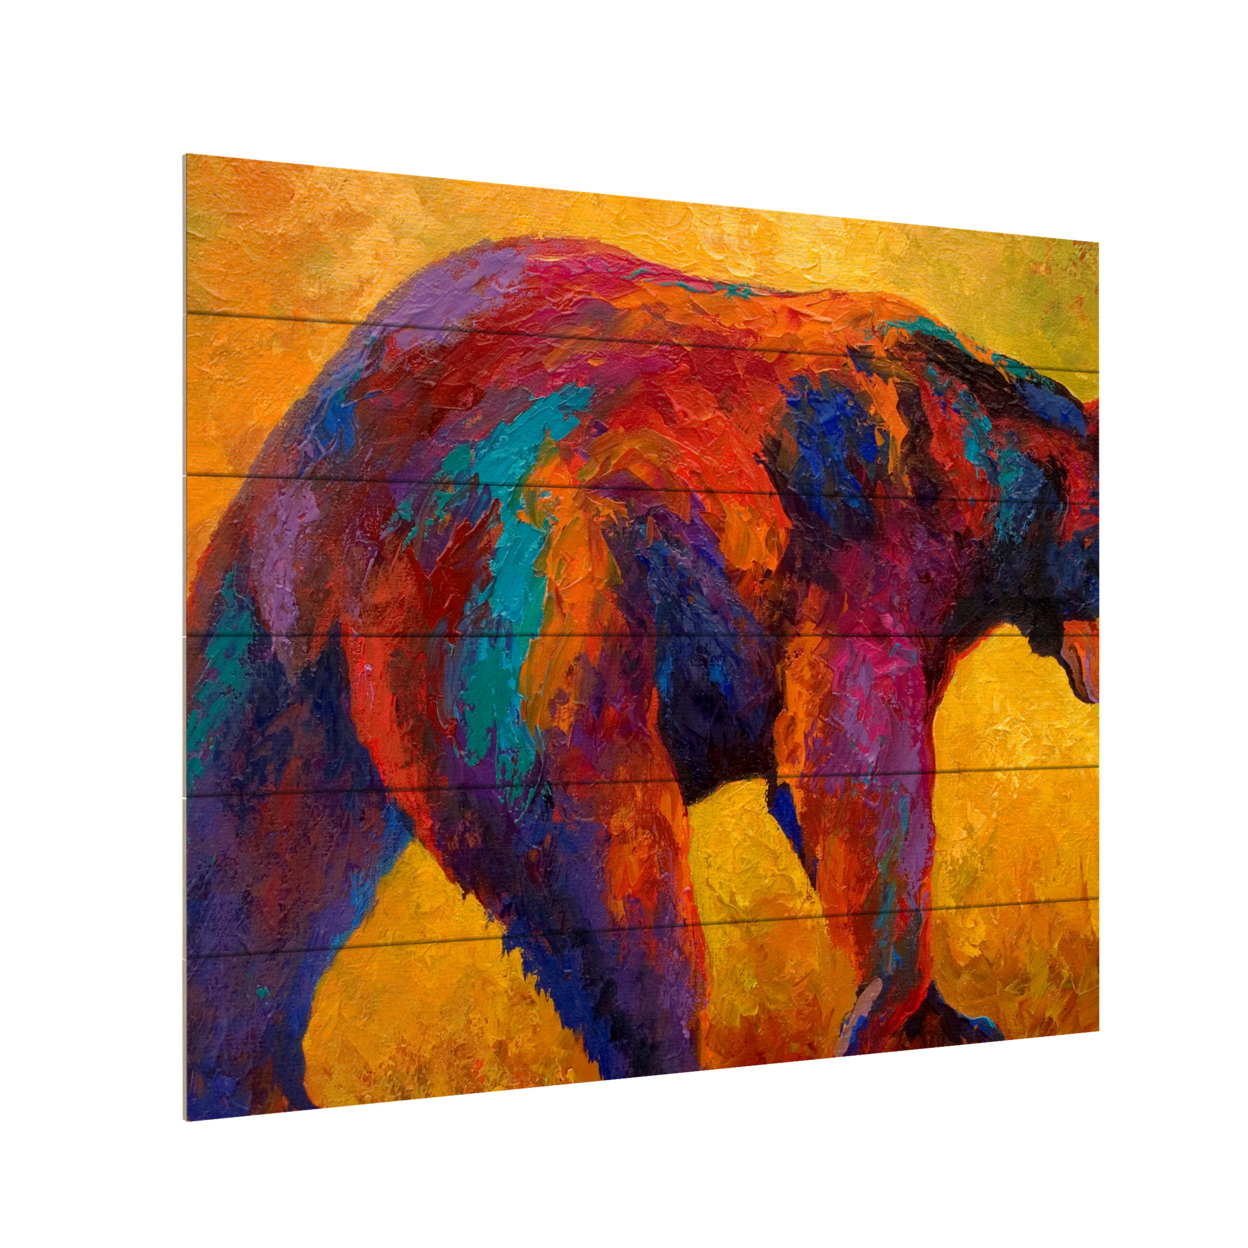 Wooden Slat Art 18 X 22 Inches Titled Daily Rounds Black Bear Ready To Hang Home Decor Picture